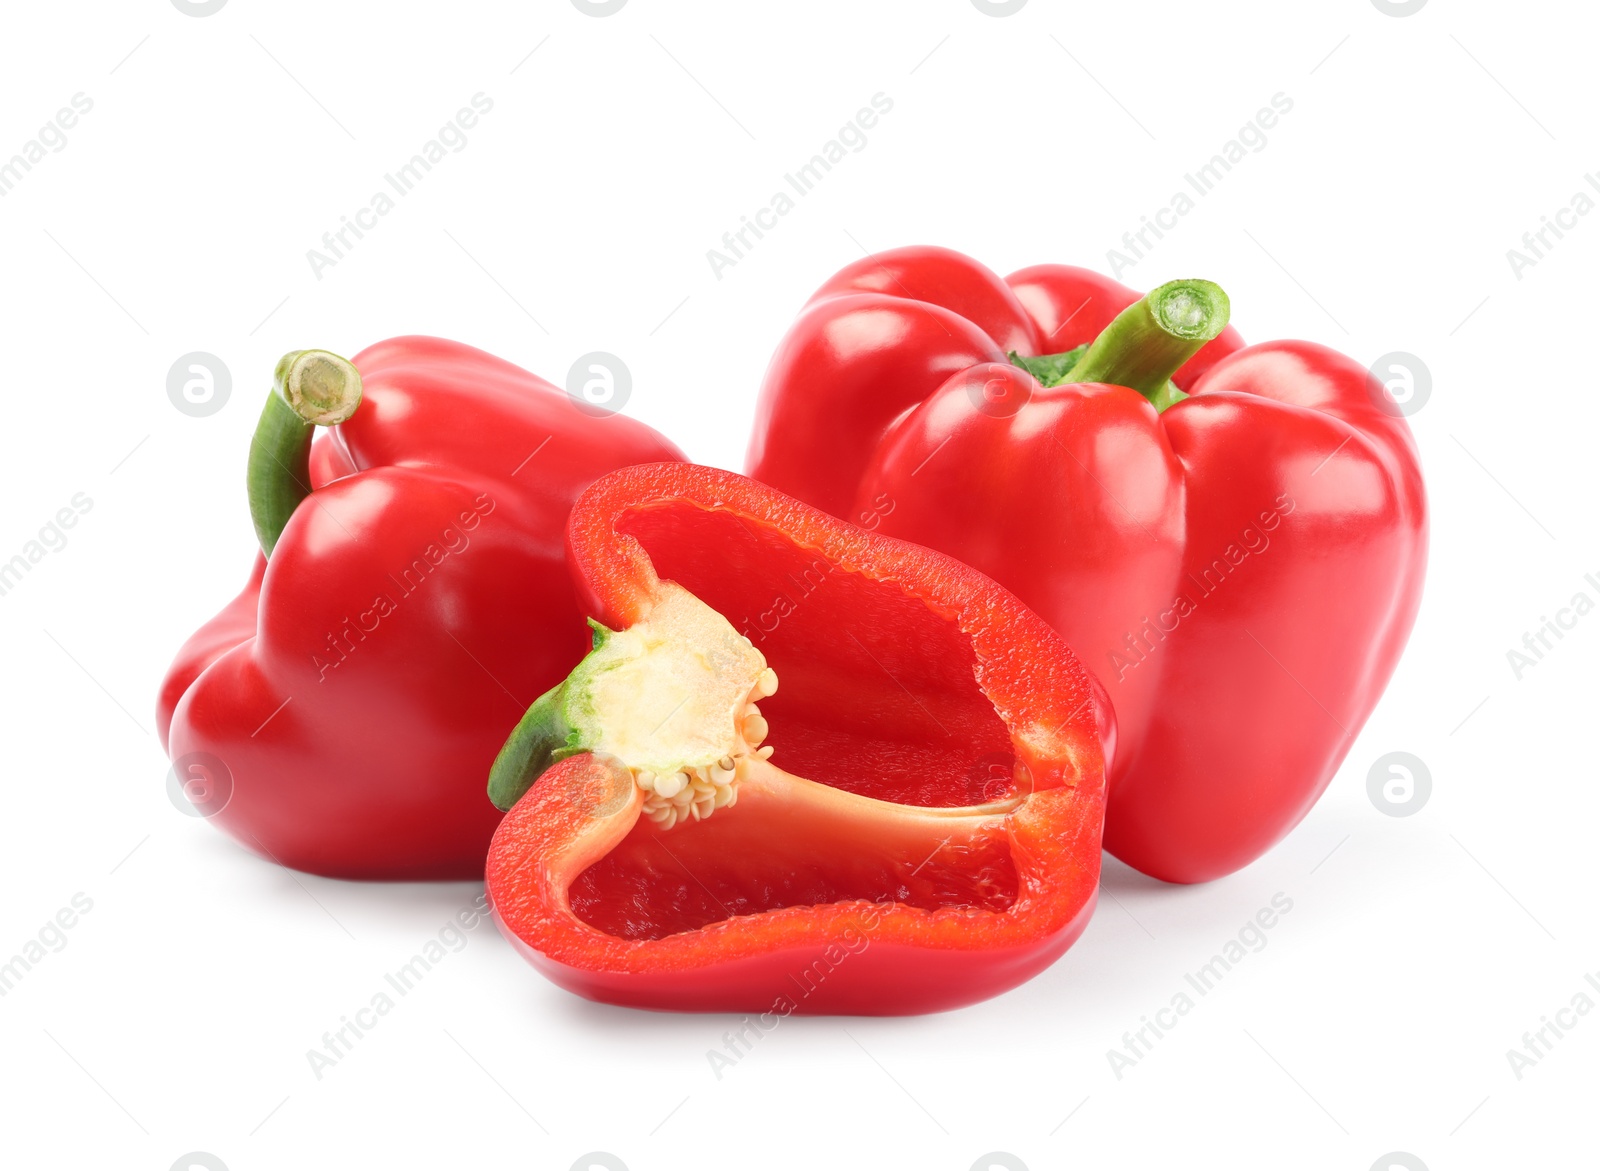 Photo of Whole and cut red bell peppers on white background